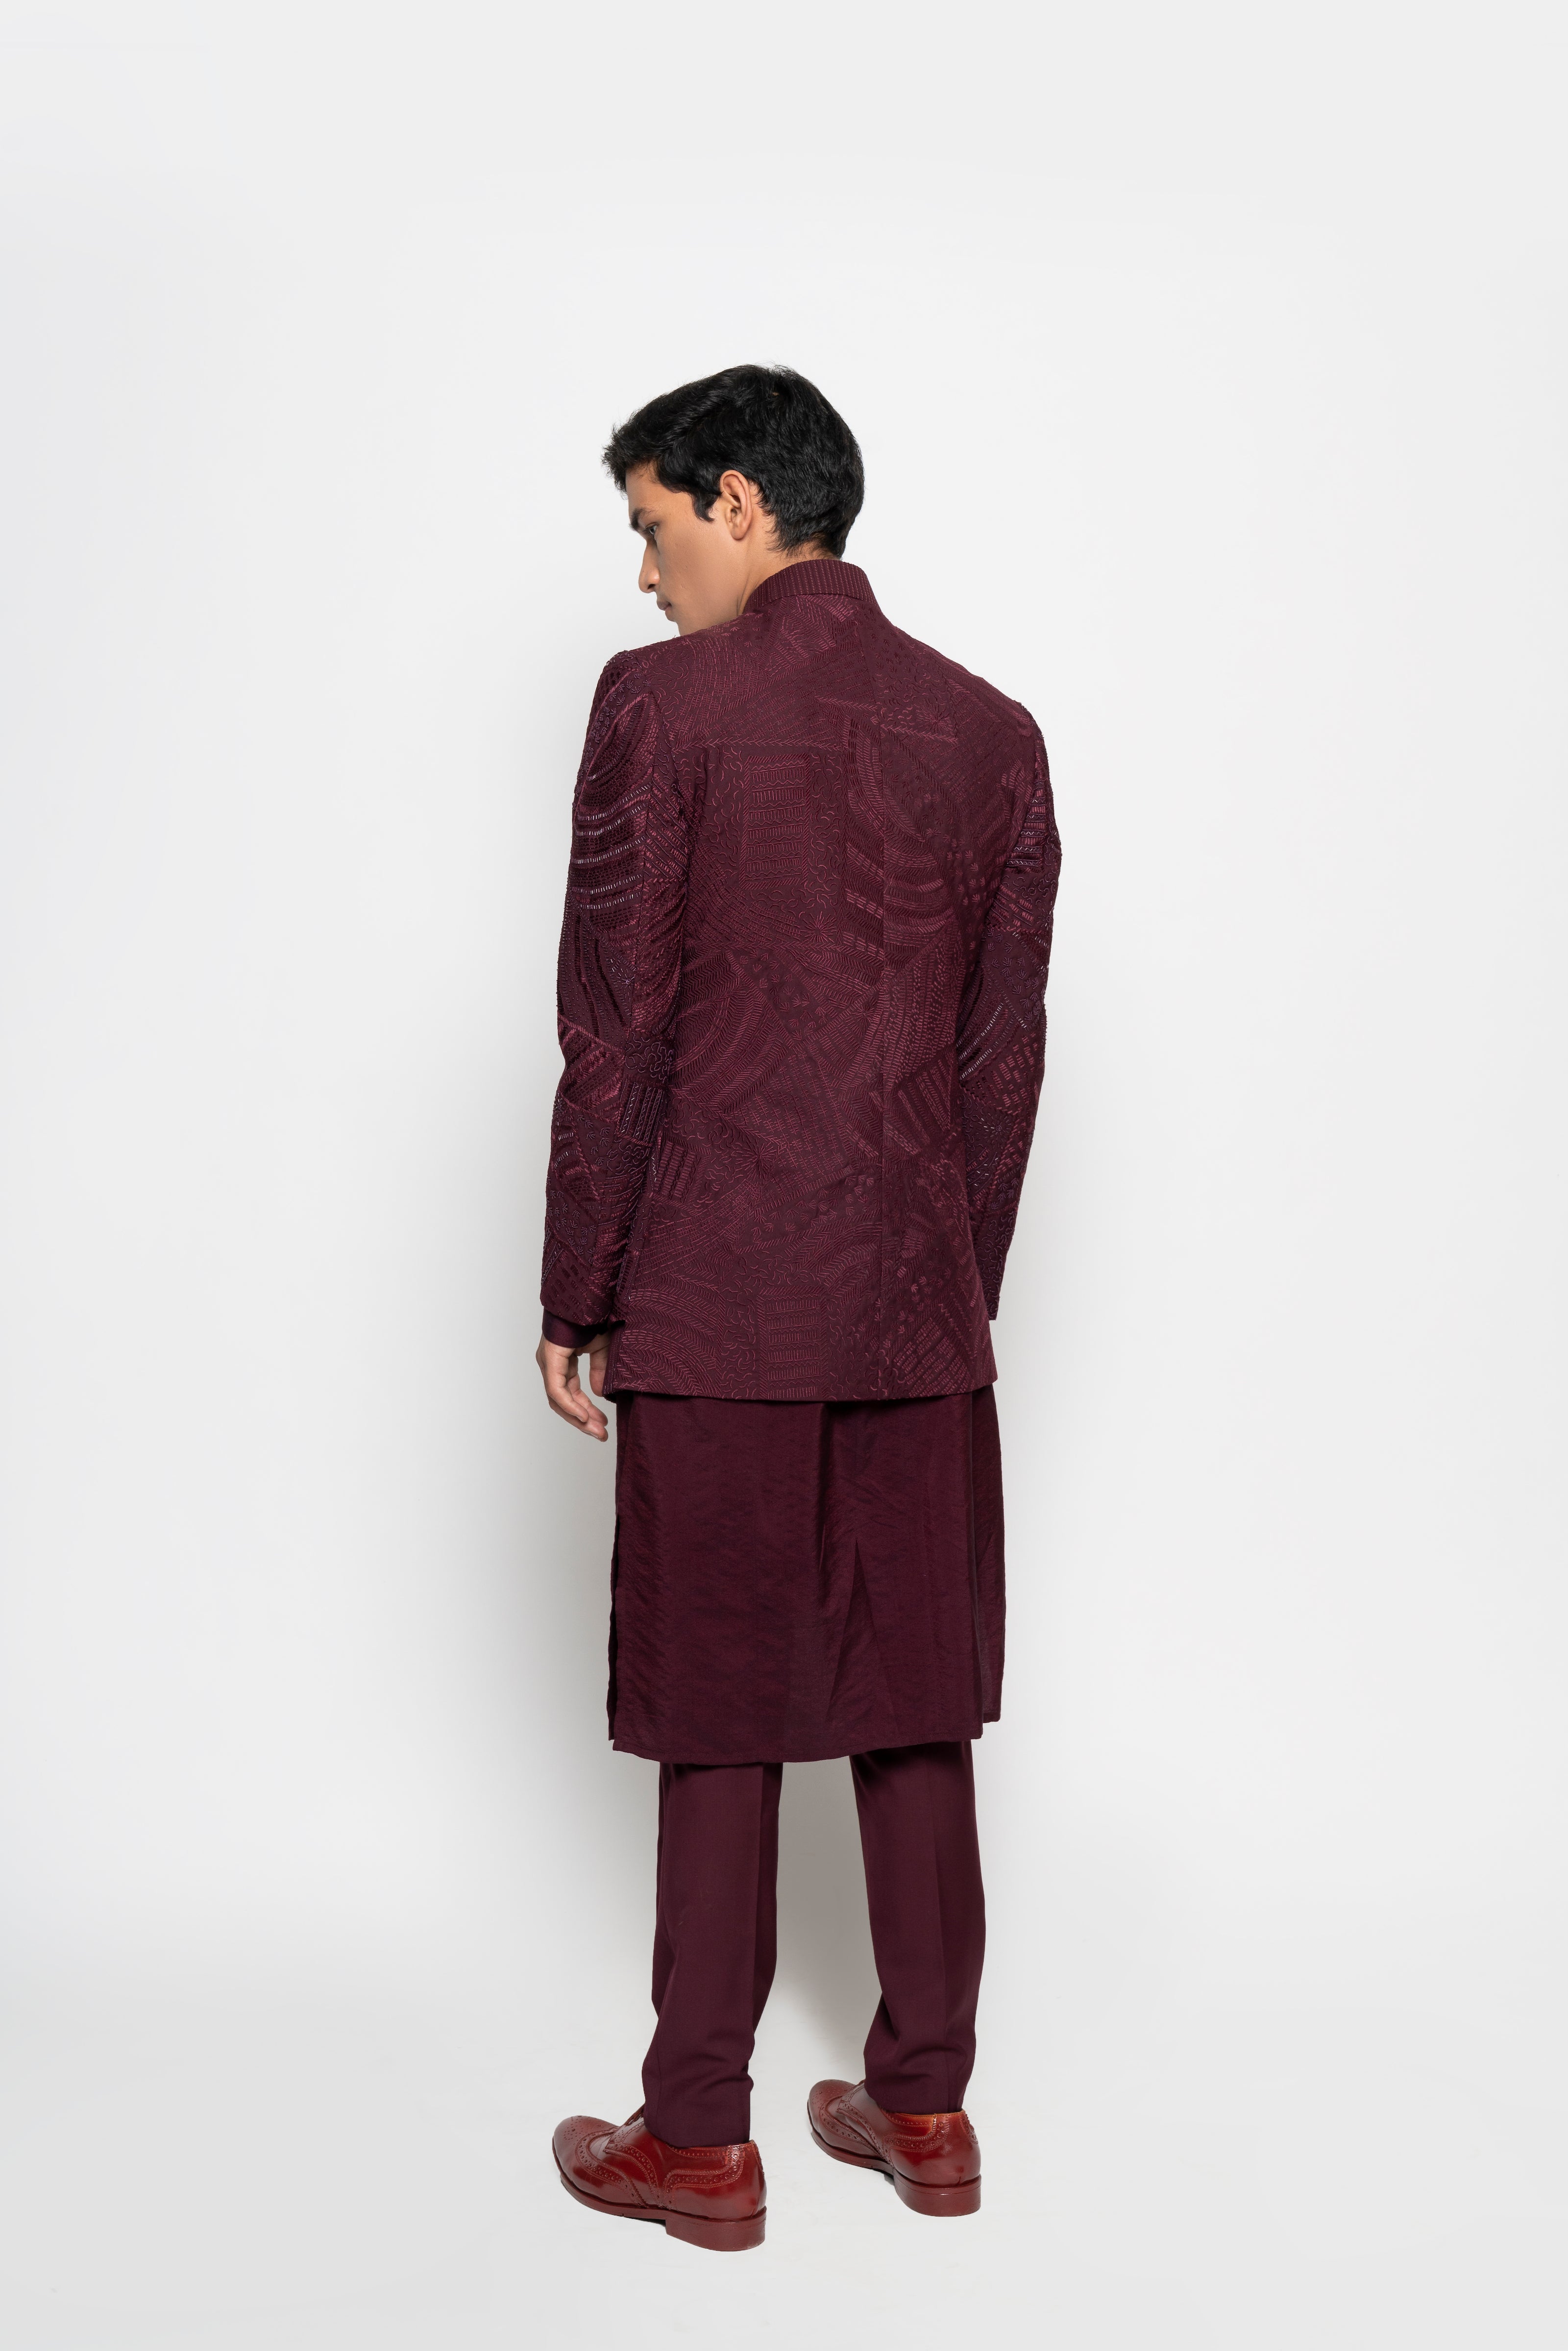 Bordeaux Embroidered Layers Bandhgala